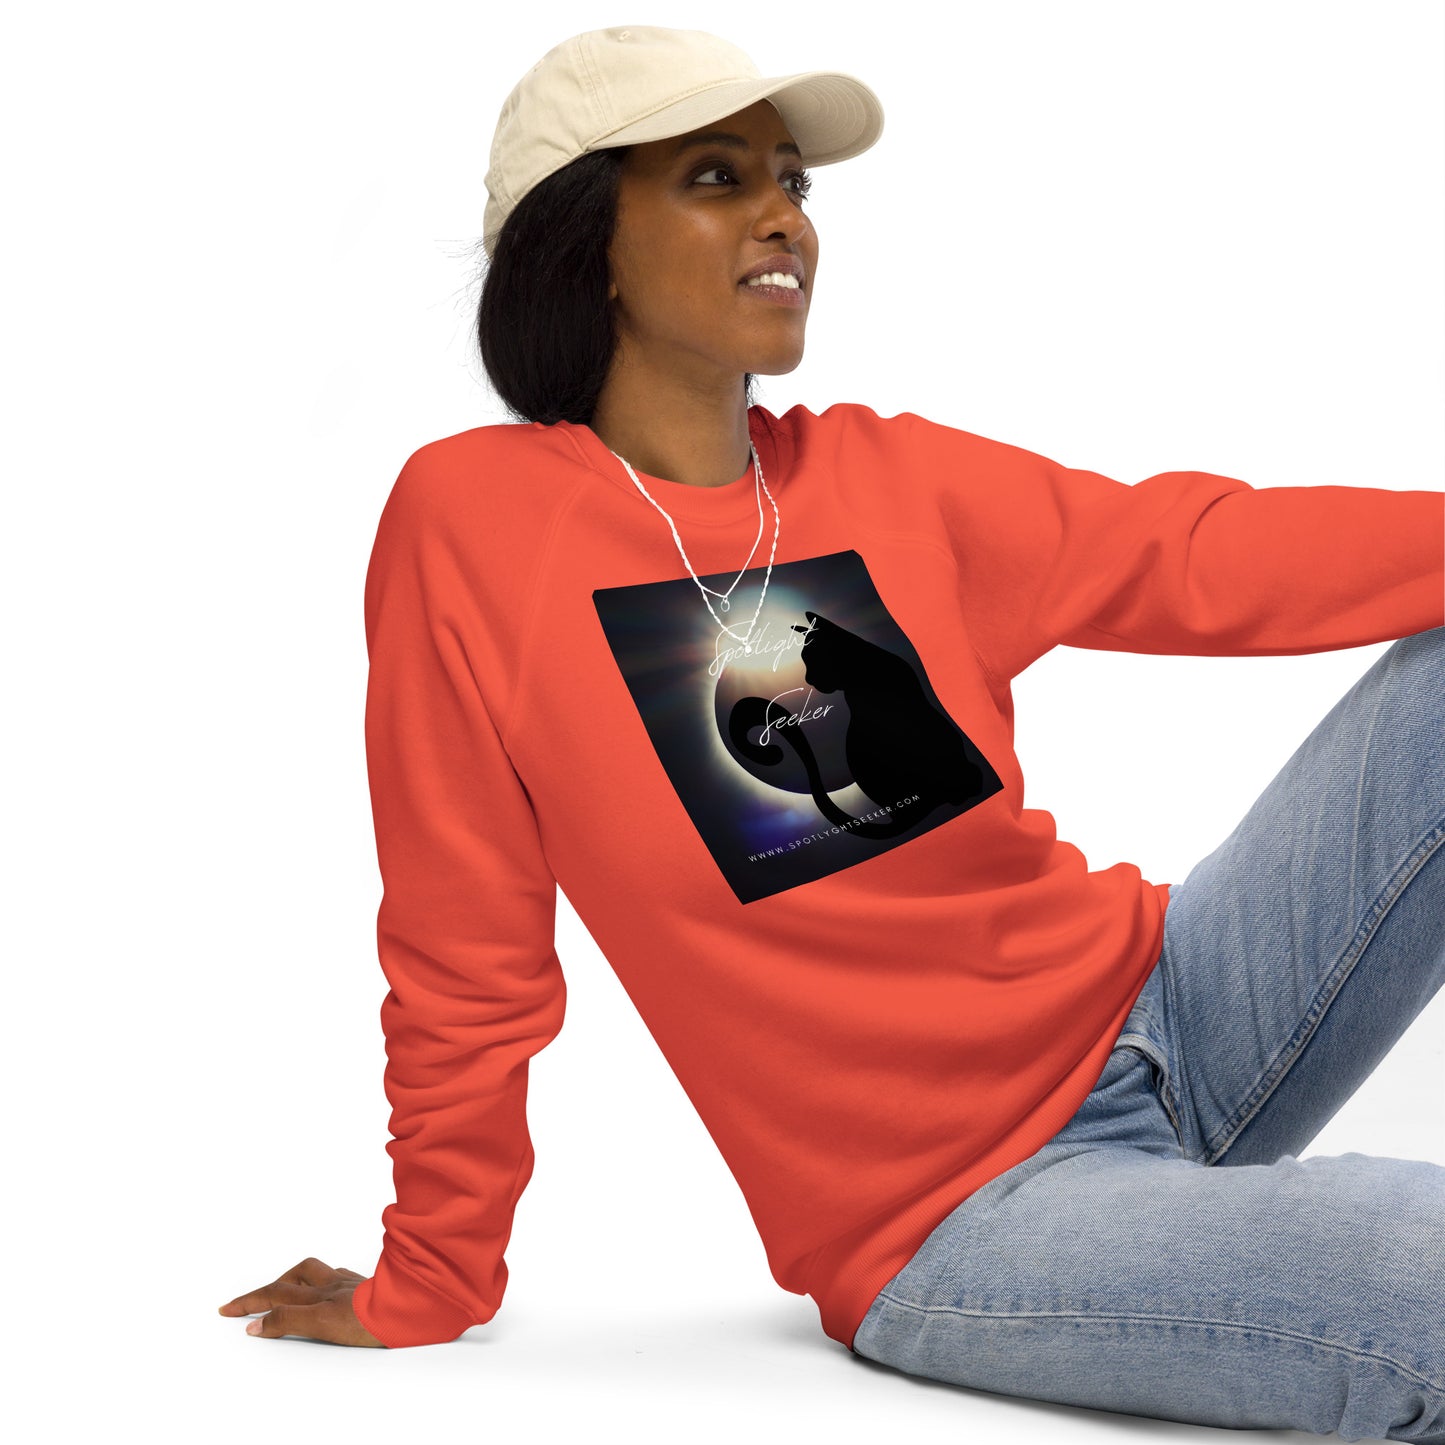 Image of the Cat Call Unisex Fitted Eco Sweatshirt - 'Cat's Tale' design, a comfortable and stylish sweatshirt embodying the theme of artists claiming their spotlight birthright with a play on words connecting to their unique creative story. Crafted from eco-friendly materials. 🎨🌟